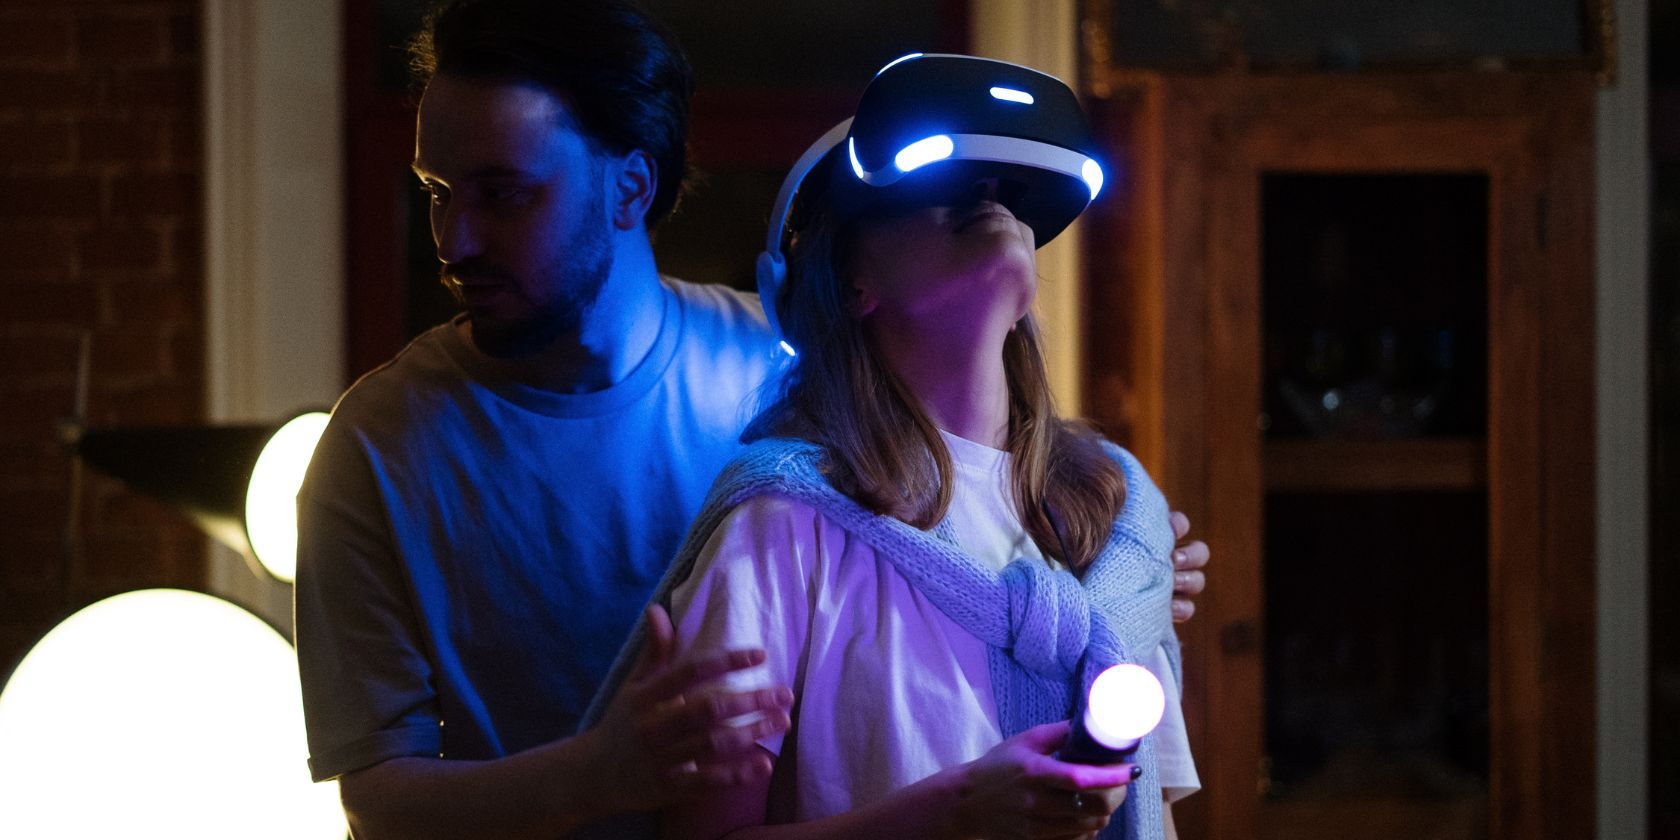 Man helping woman while she plays VR